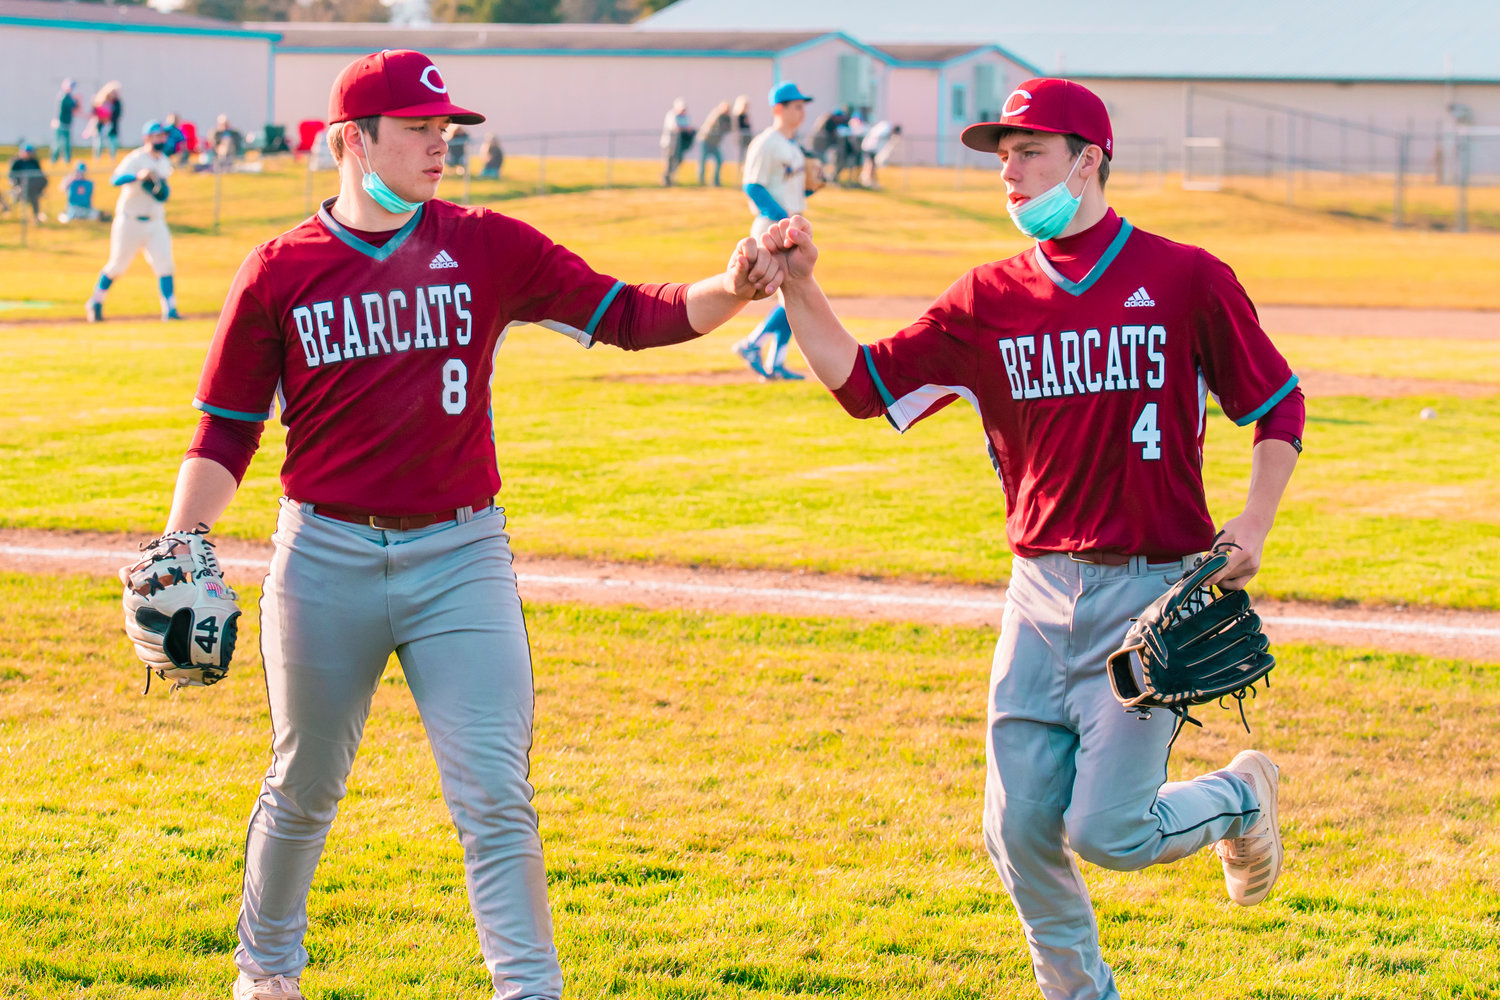 Bearcats’ pound fists as they retire an inning during a game against the Warriors in Rochester on Wednesday.